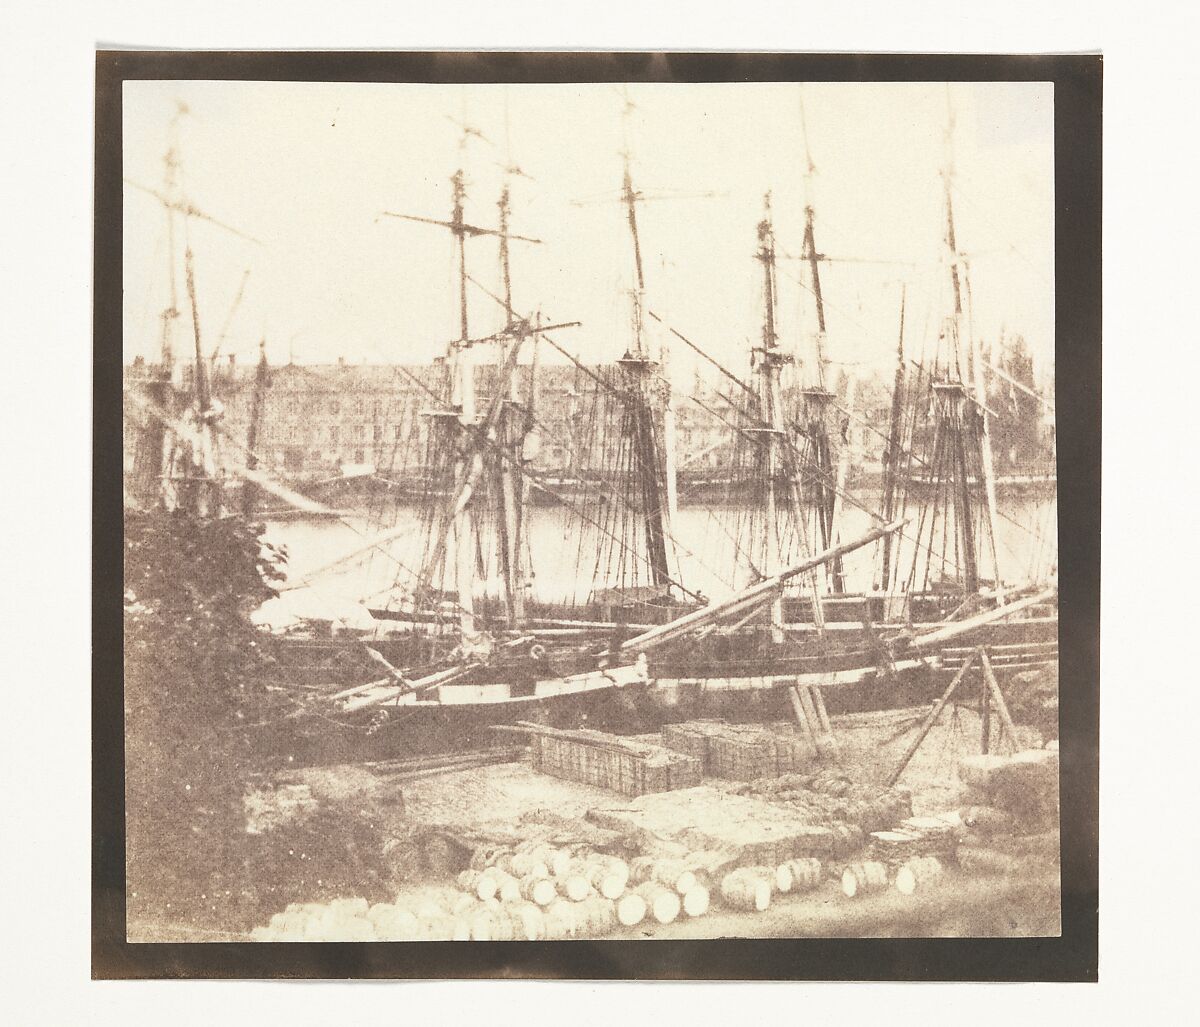 The Seine at Rouen, William Henry Fox Talbot (British, Dorset 1800–1877 Lacock), Salted paper print from paper negative 